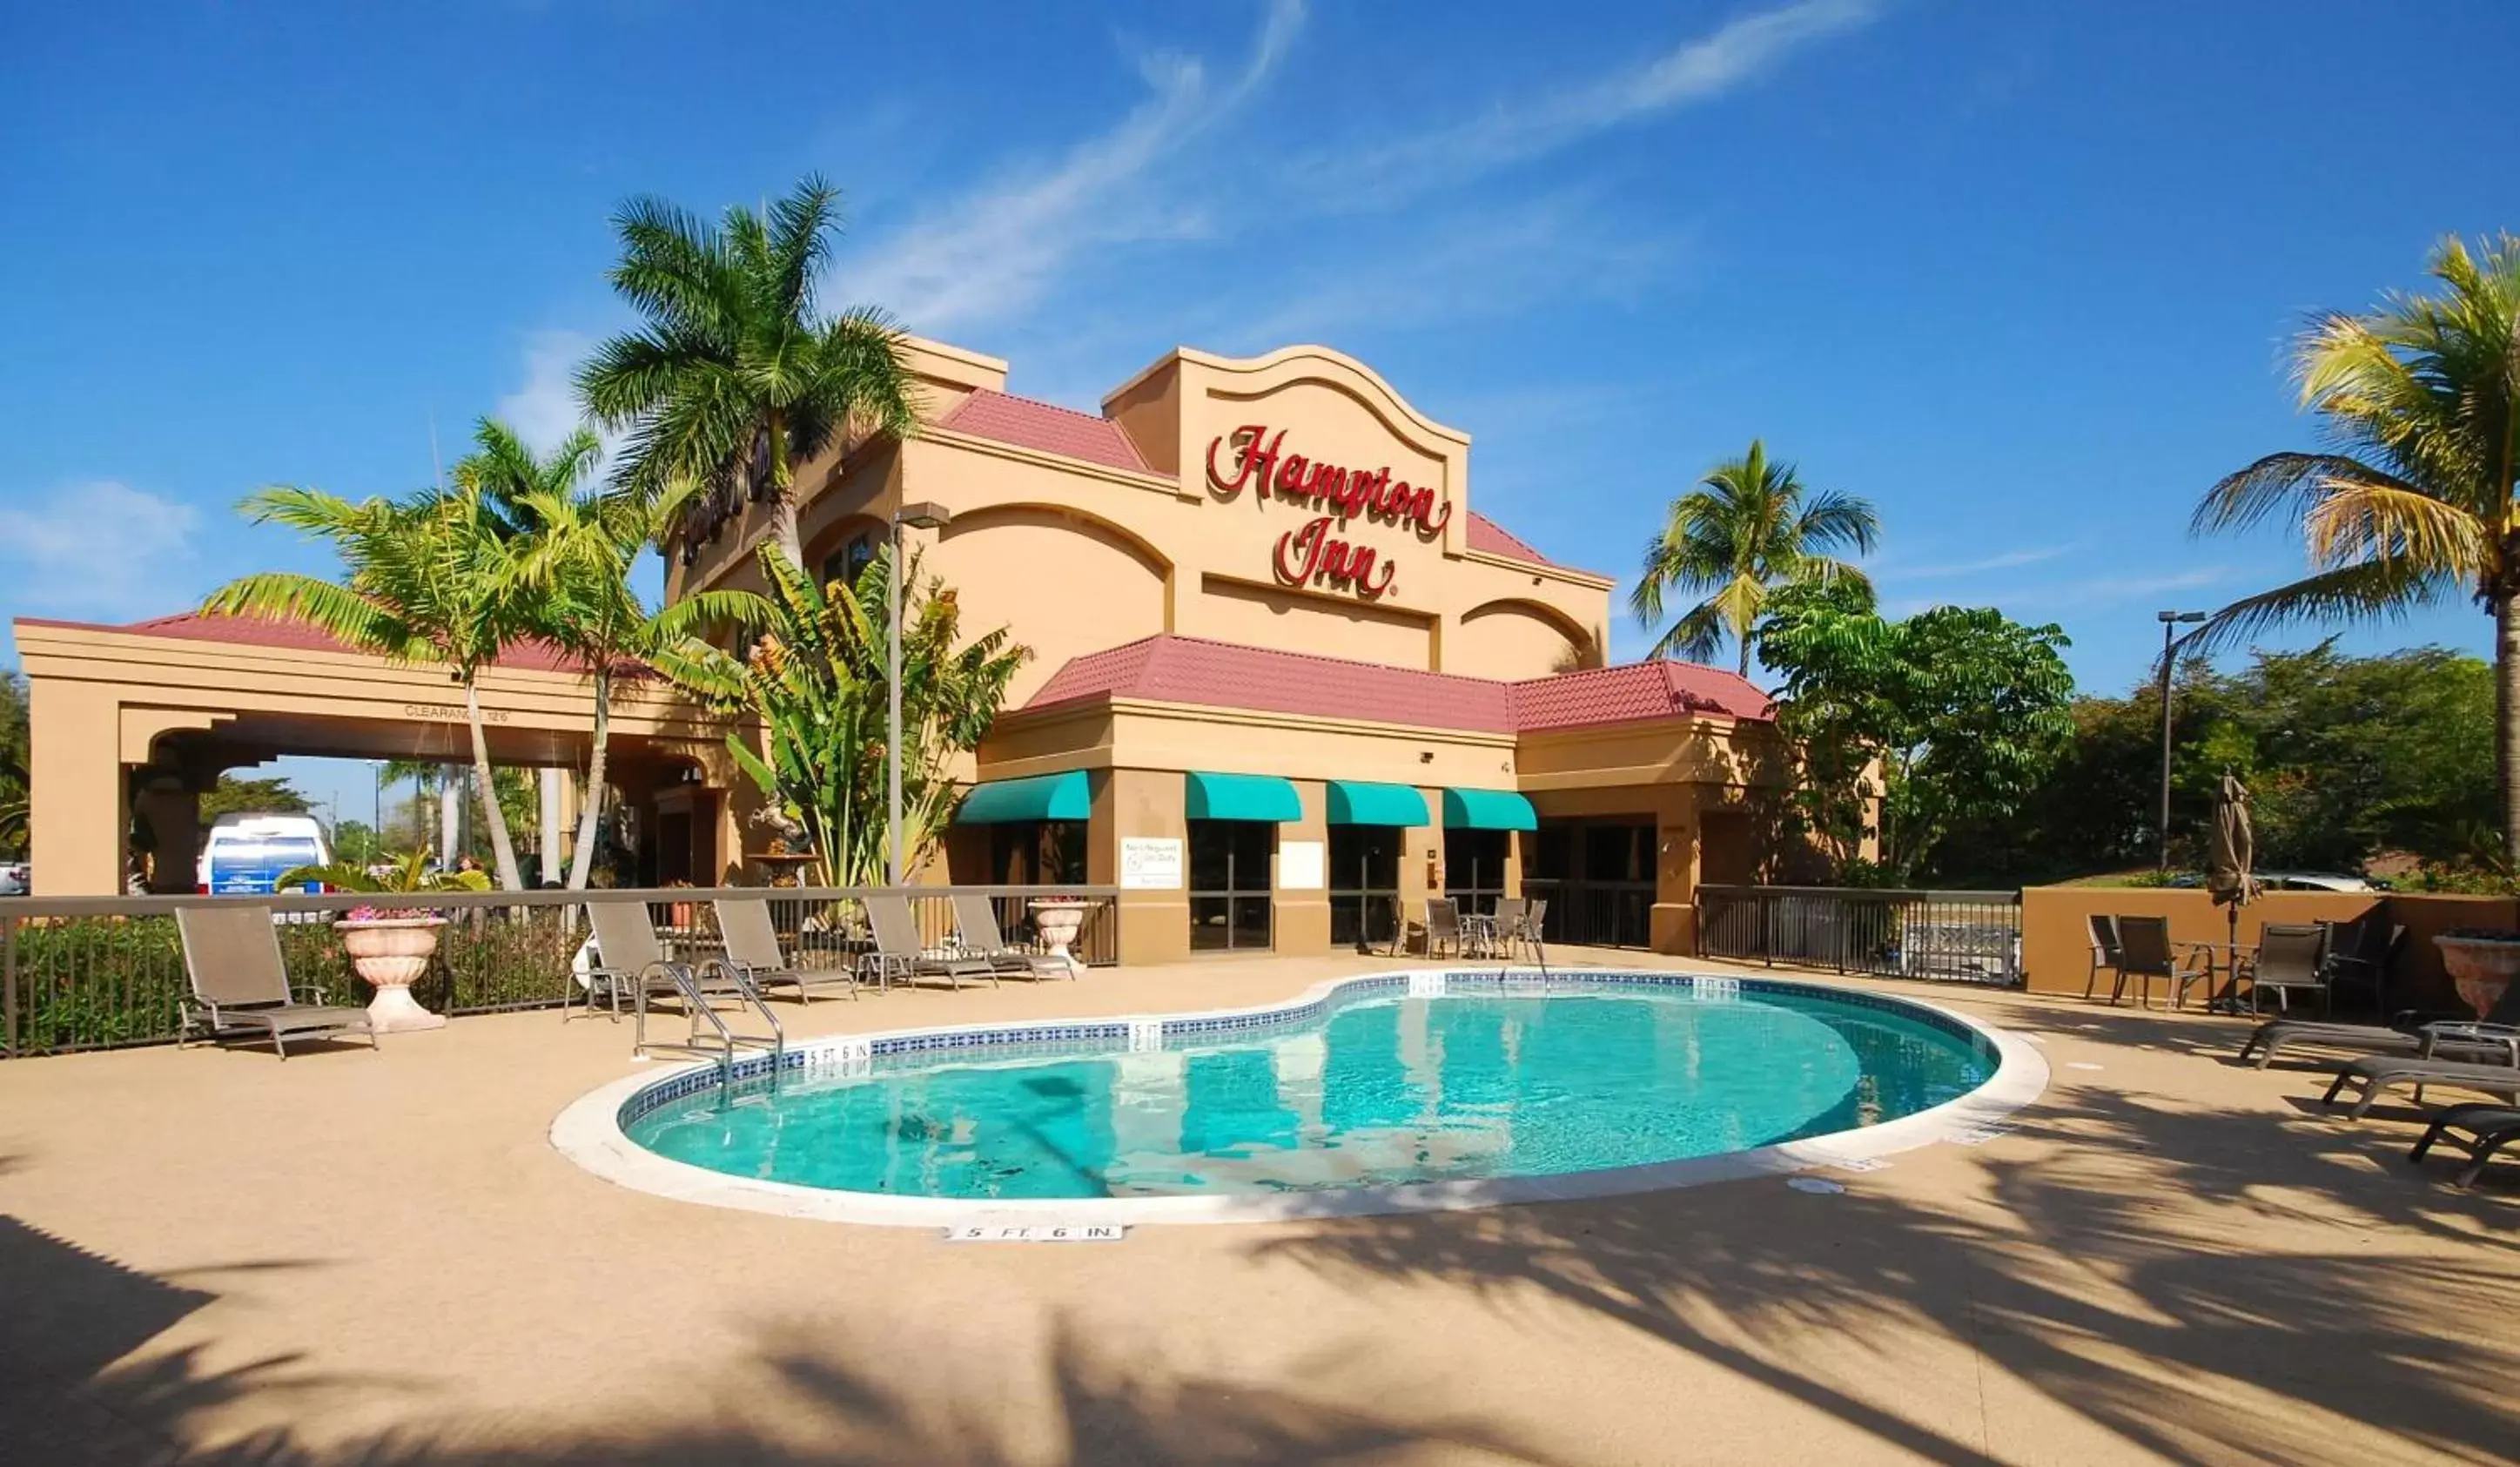 Property Building in Hampton Inn Fort Myers-Airport & I-75